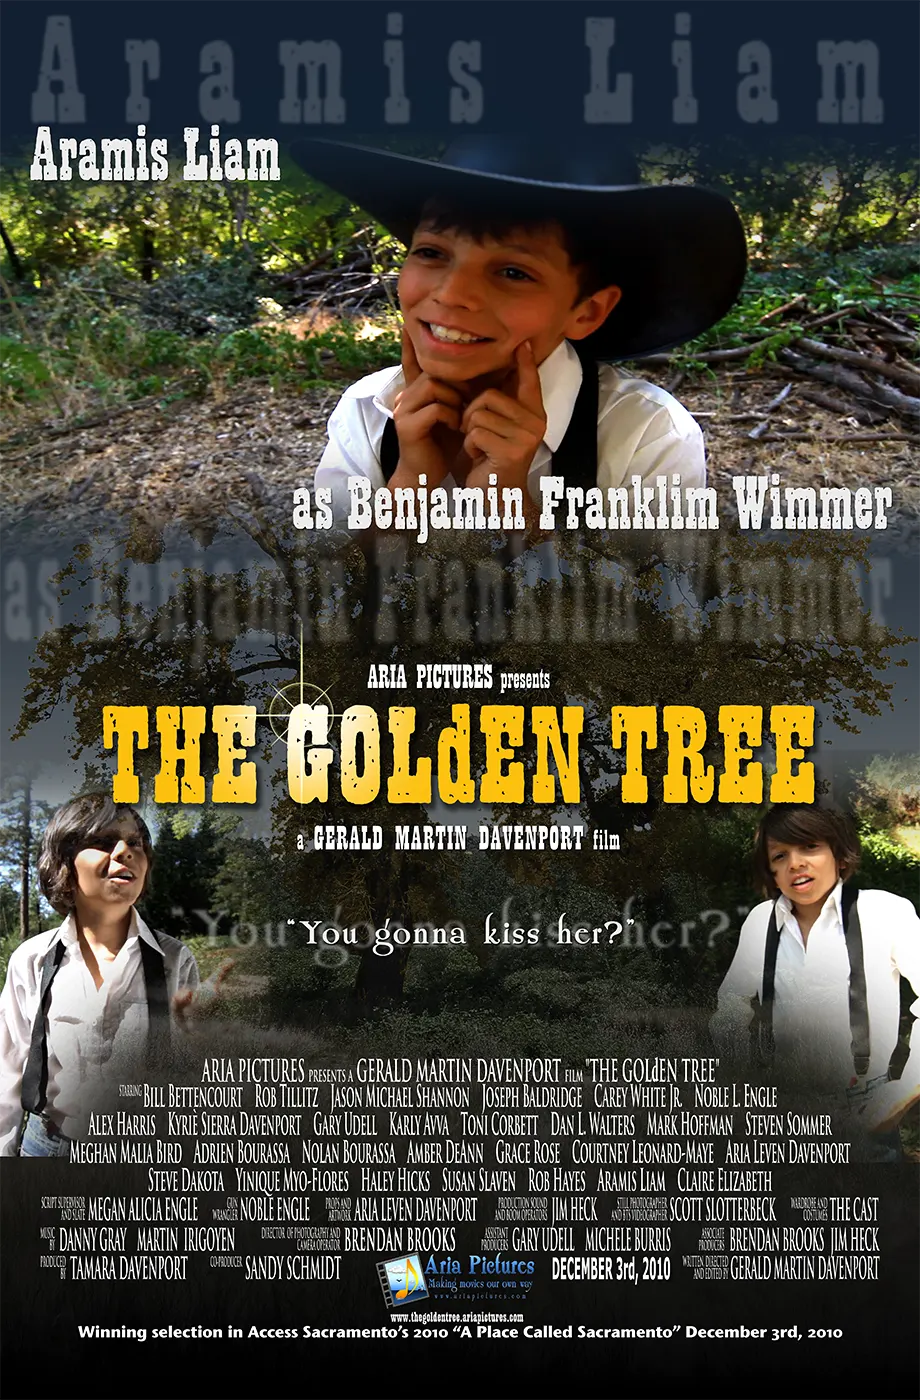 Aramis Liam poster from THE GOLdEN TREE (2010).